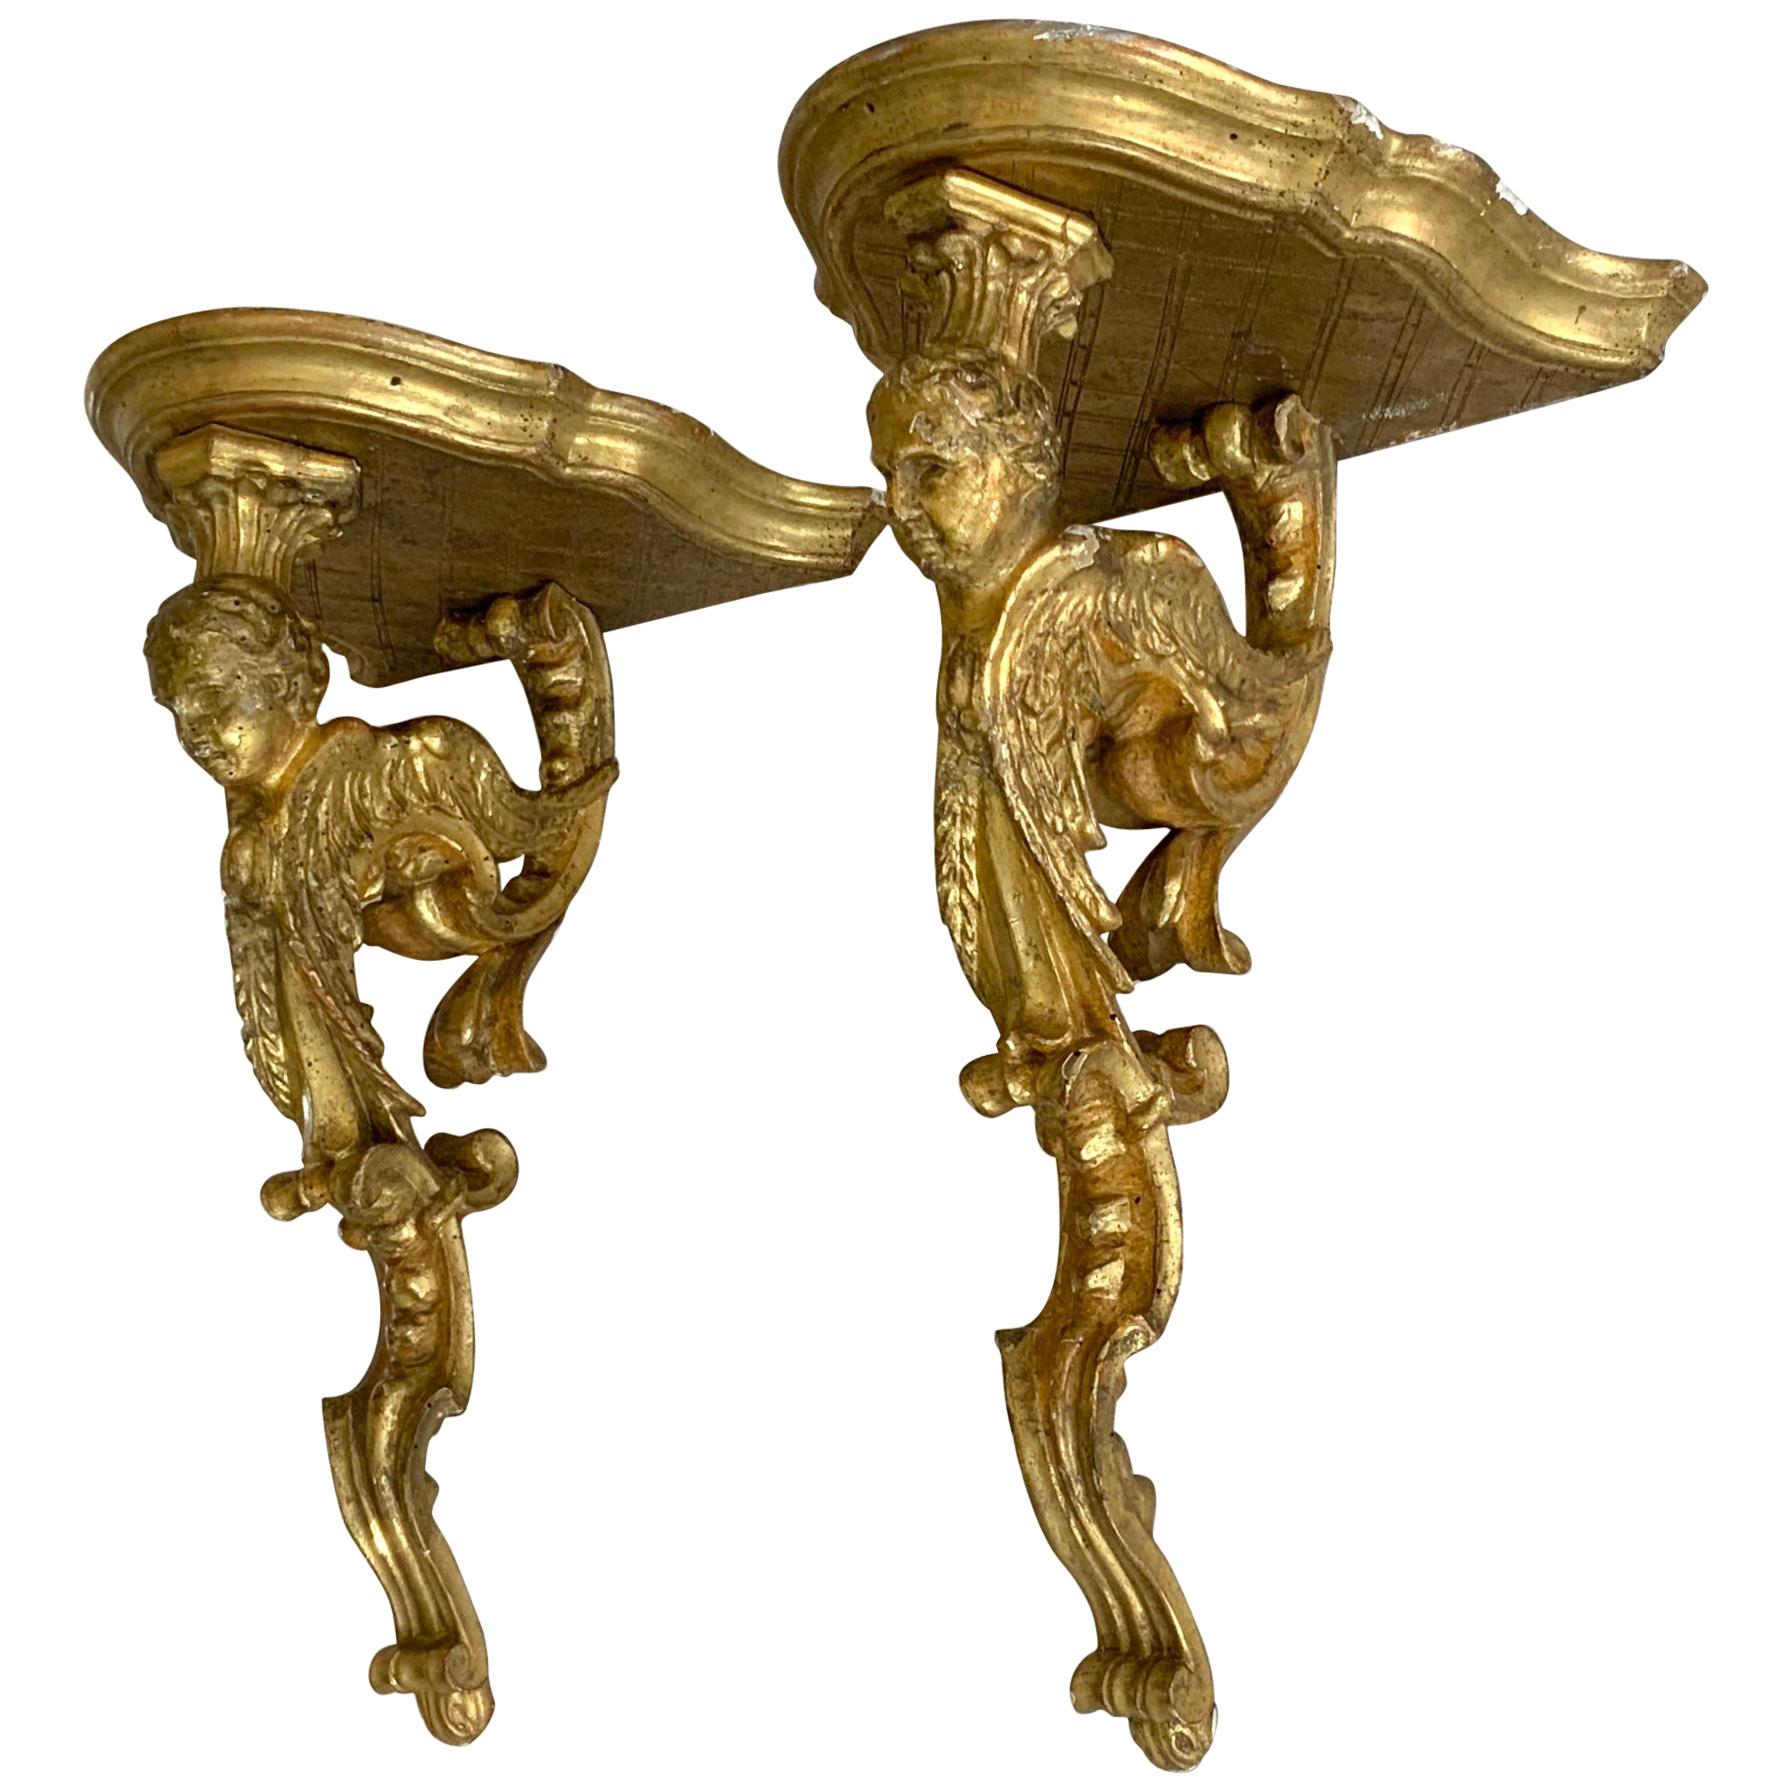 Pair of Italian Giltwood Sphinx Wall Shelves, 18th Century, Directoire Period